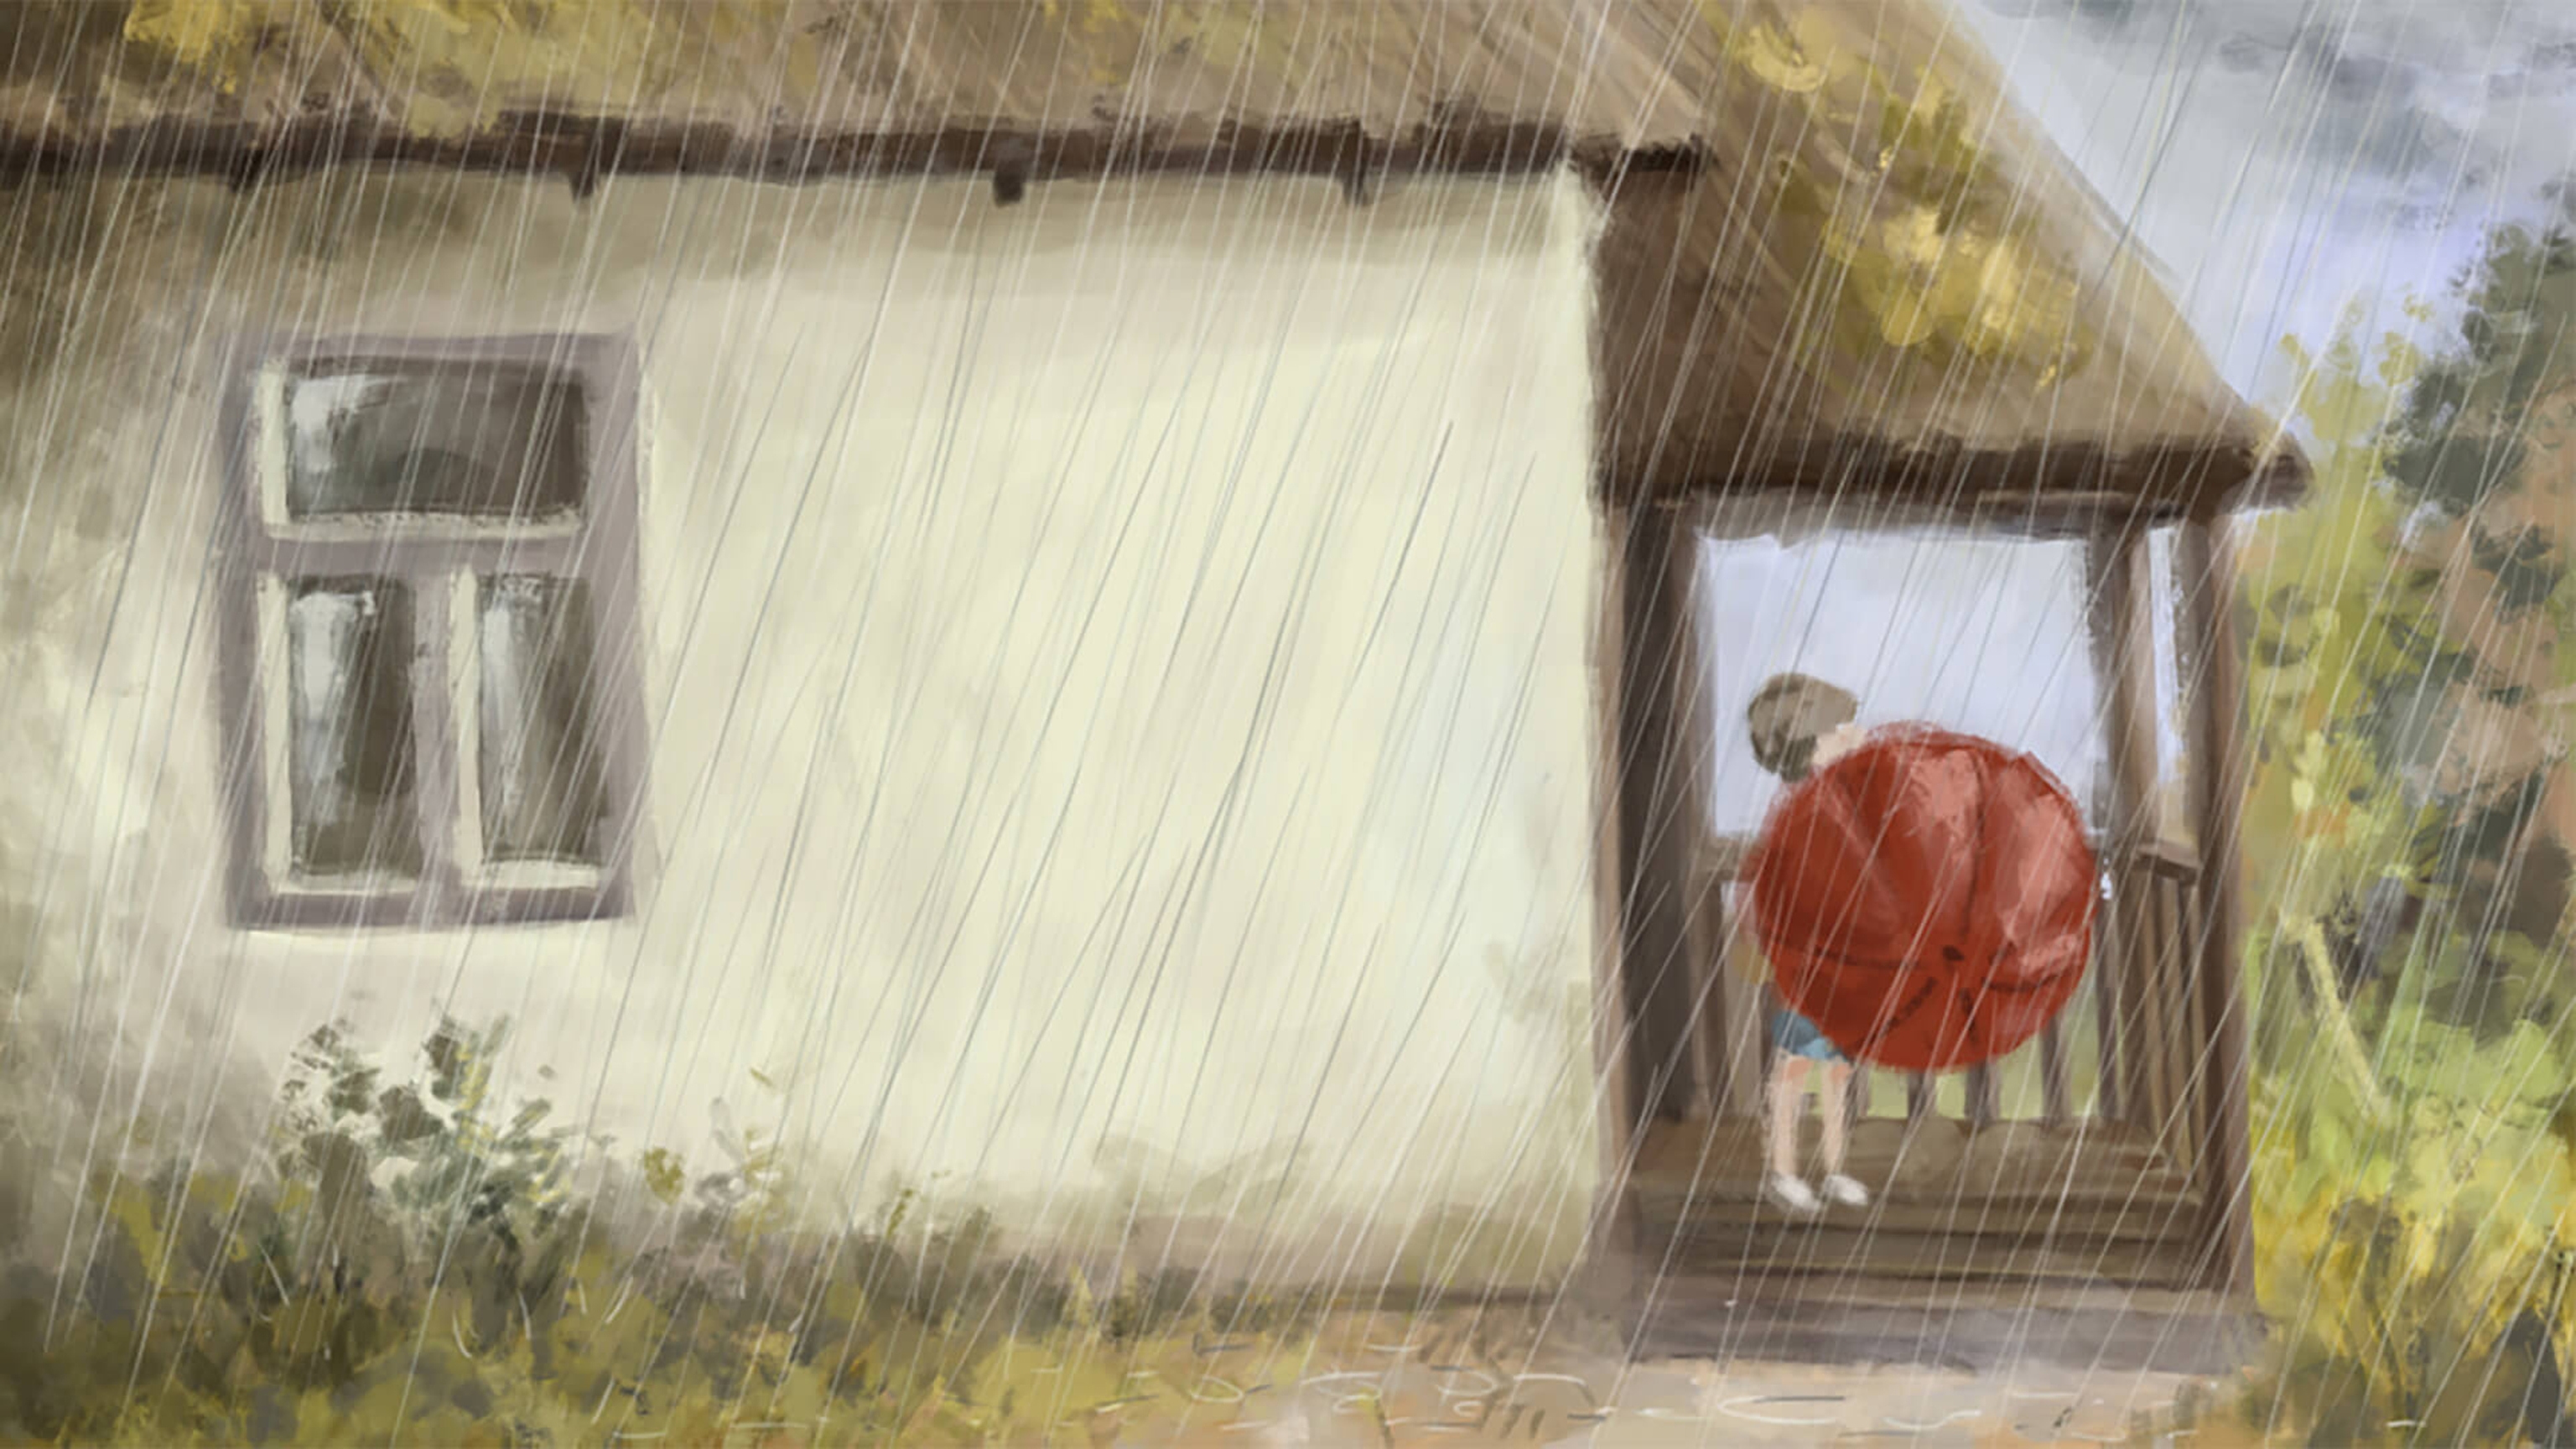 Storyboarding sketch of a child leaving a house with a red umbrella